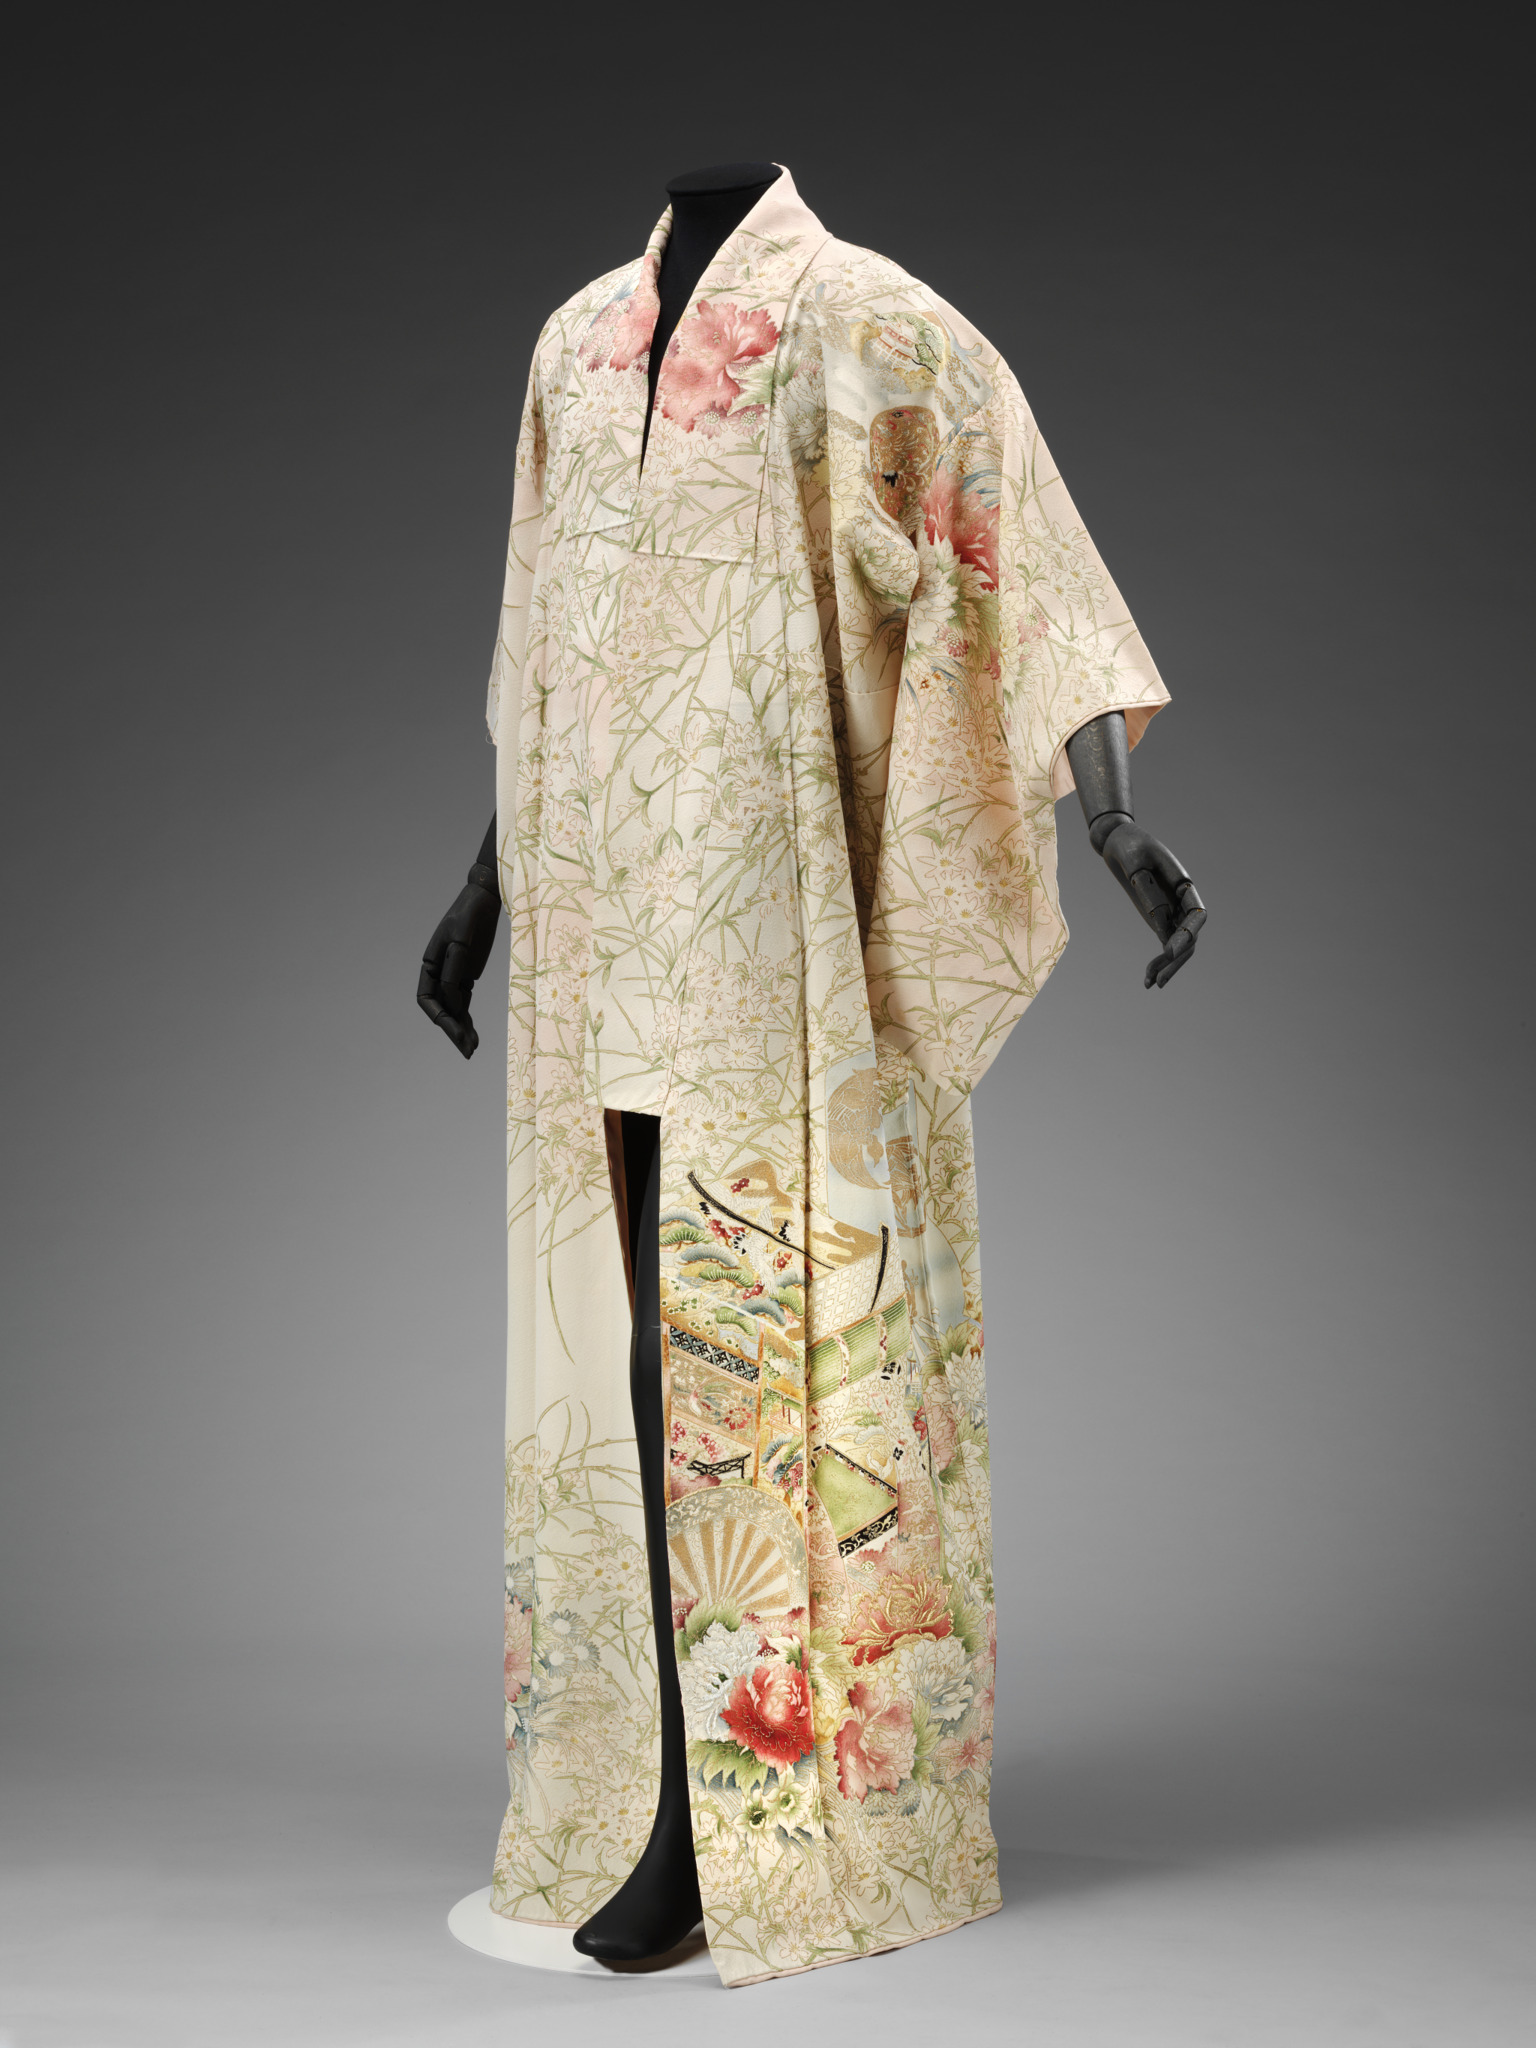 A kimono once owned and worn by Freddie Mercury